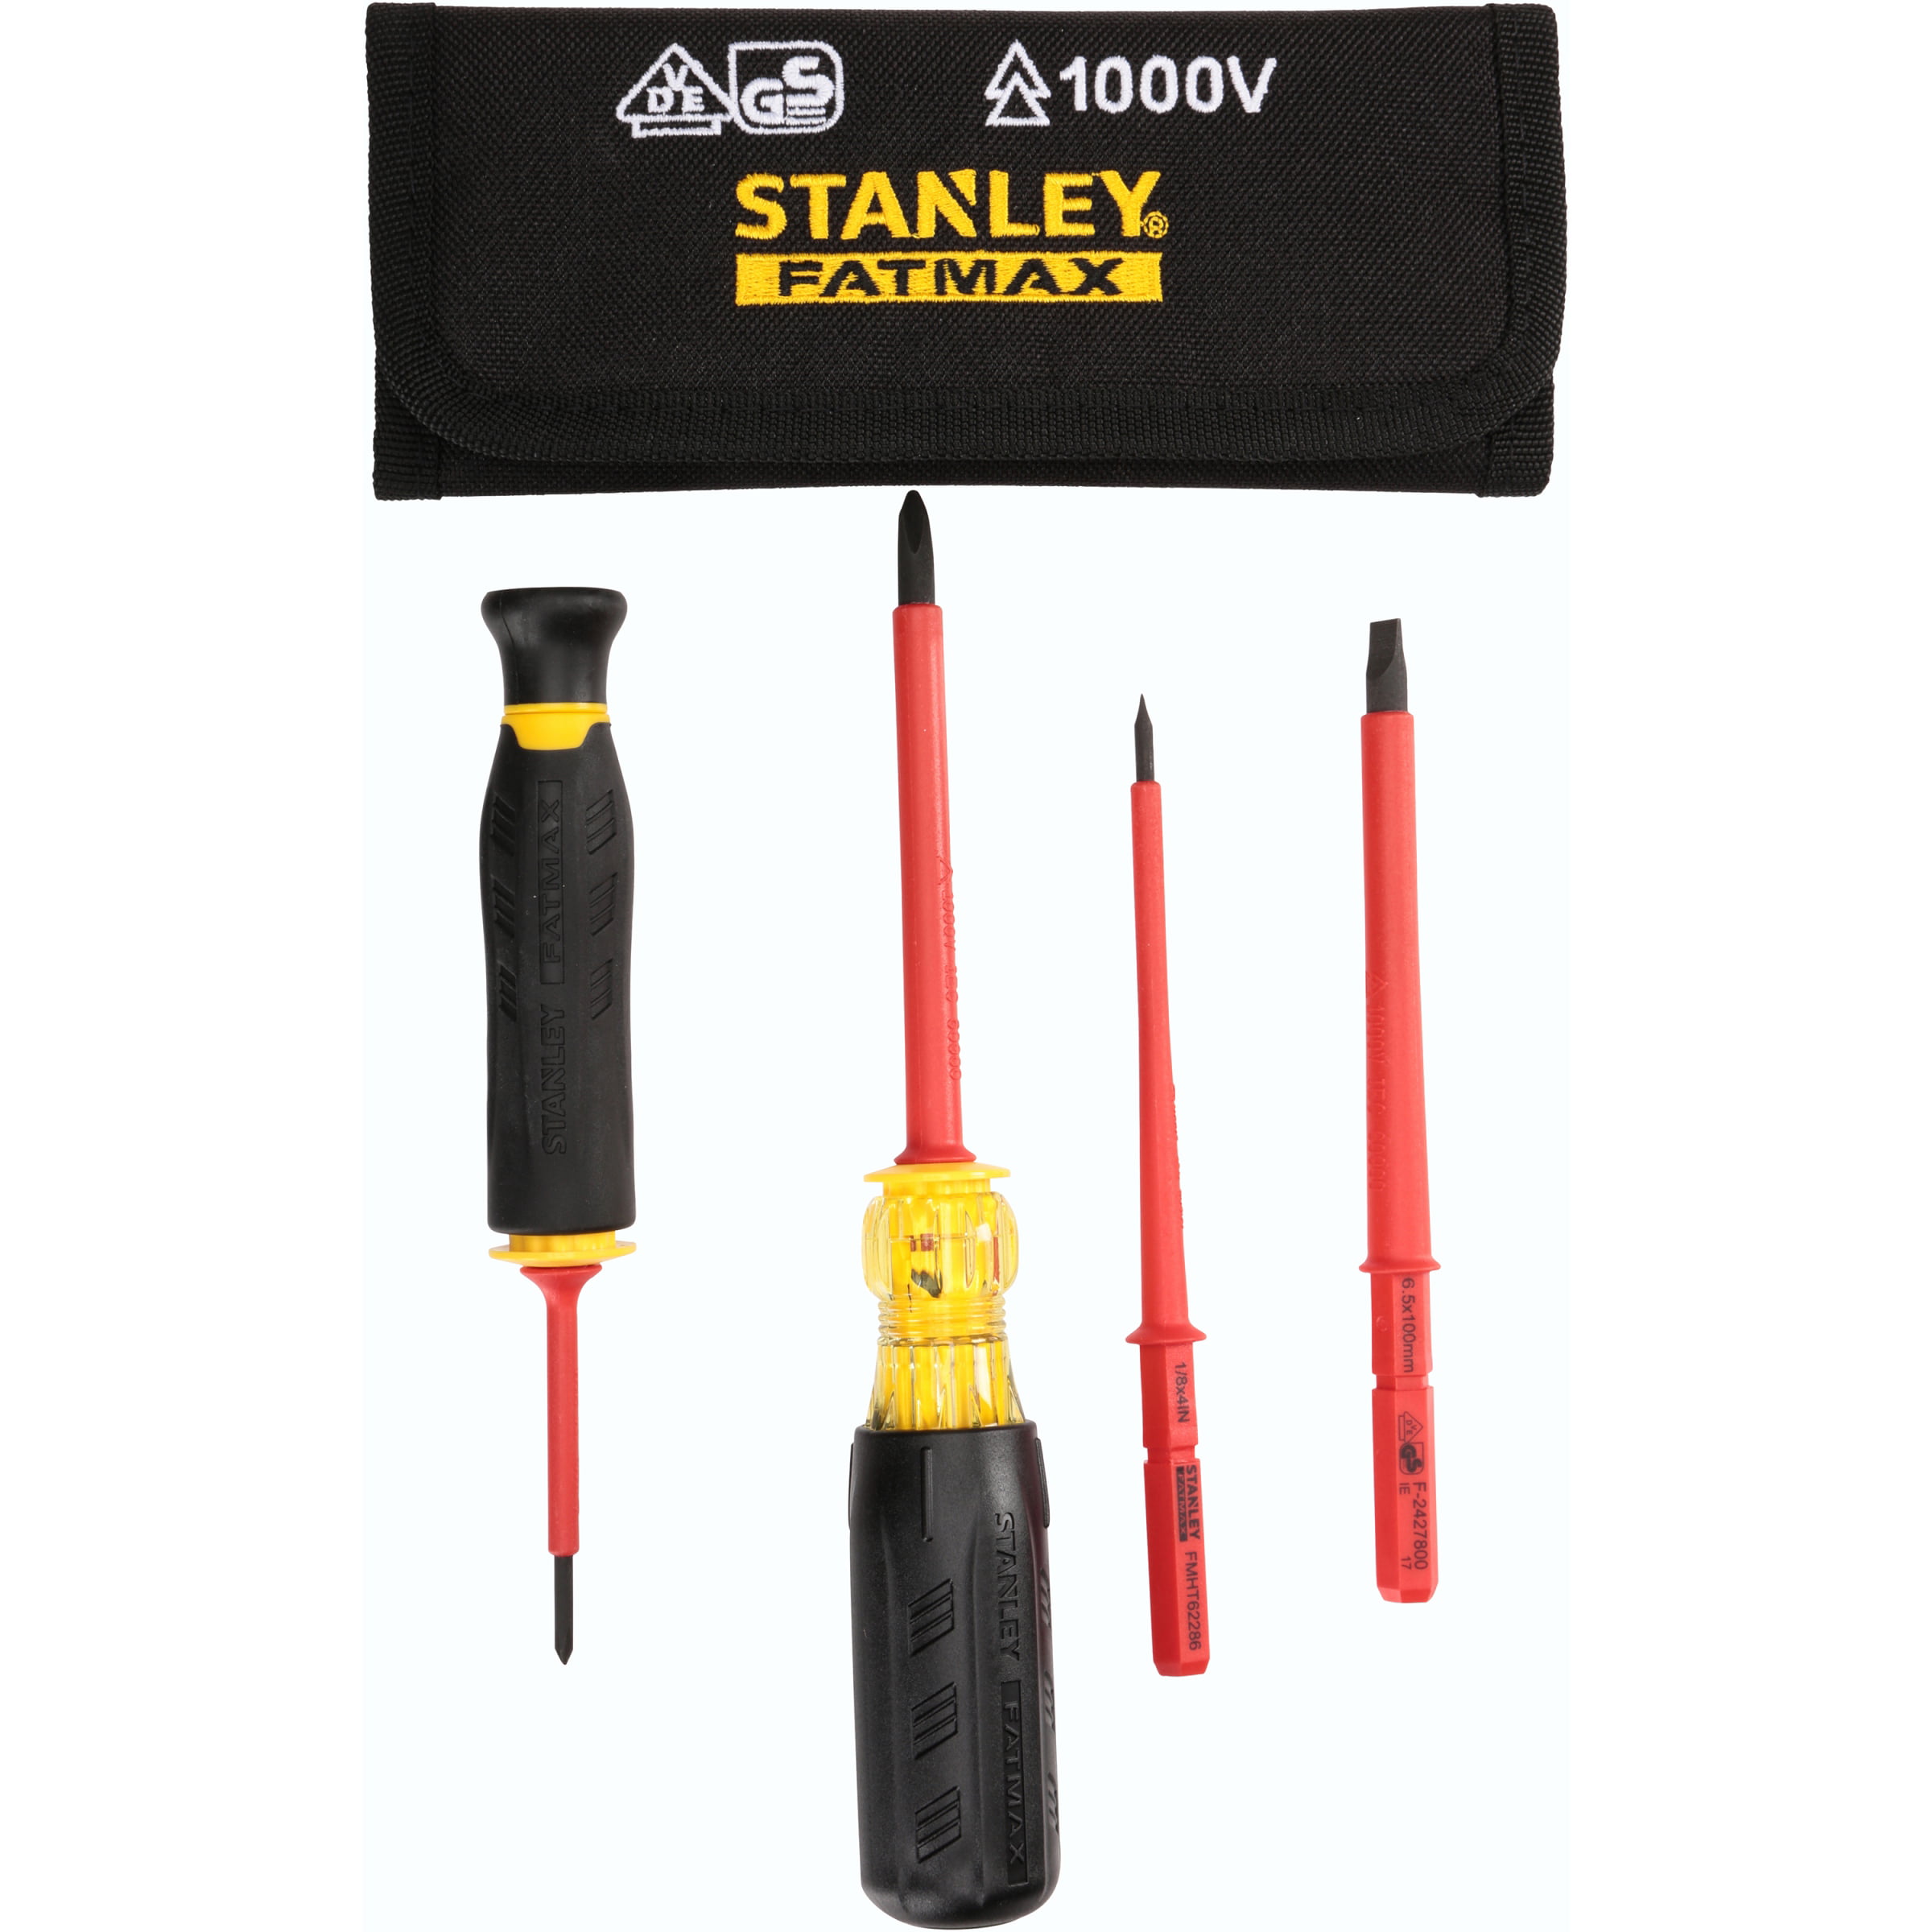 Stanley FatMax Screwdriver with Comfortable Rubber Grip for Tougher DIY Jobs Size 6.5 x 30mm Metal